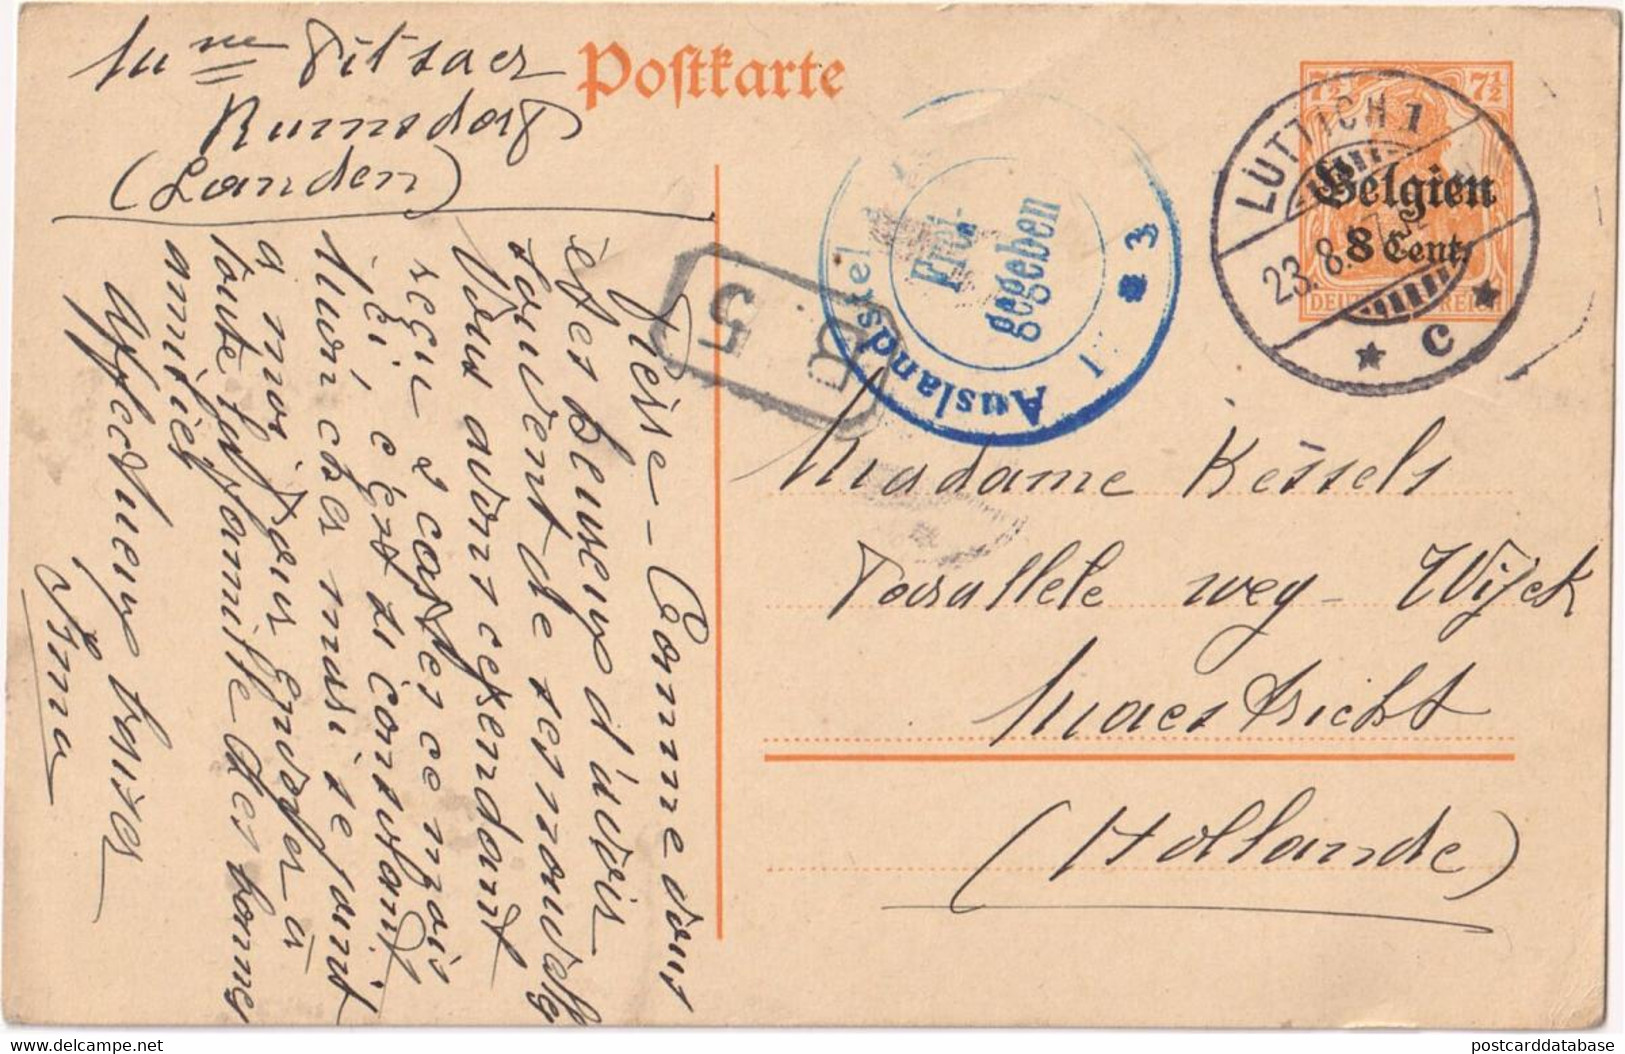 Stamped Stationery Belgium German Occupation 1917 - Sent From Luttich Liege To Maastricht - German Occupation